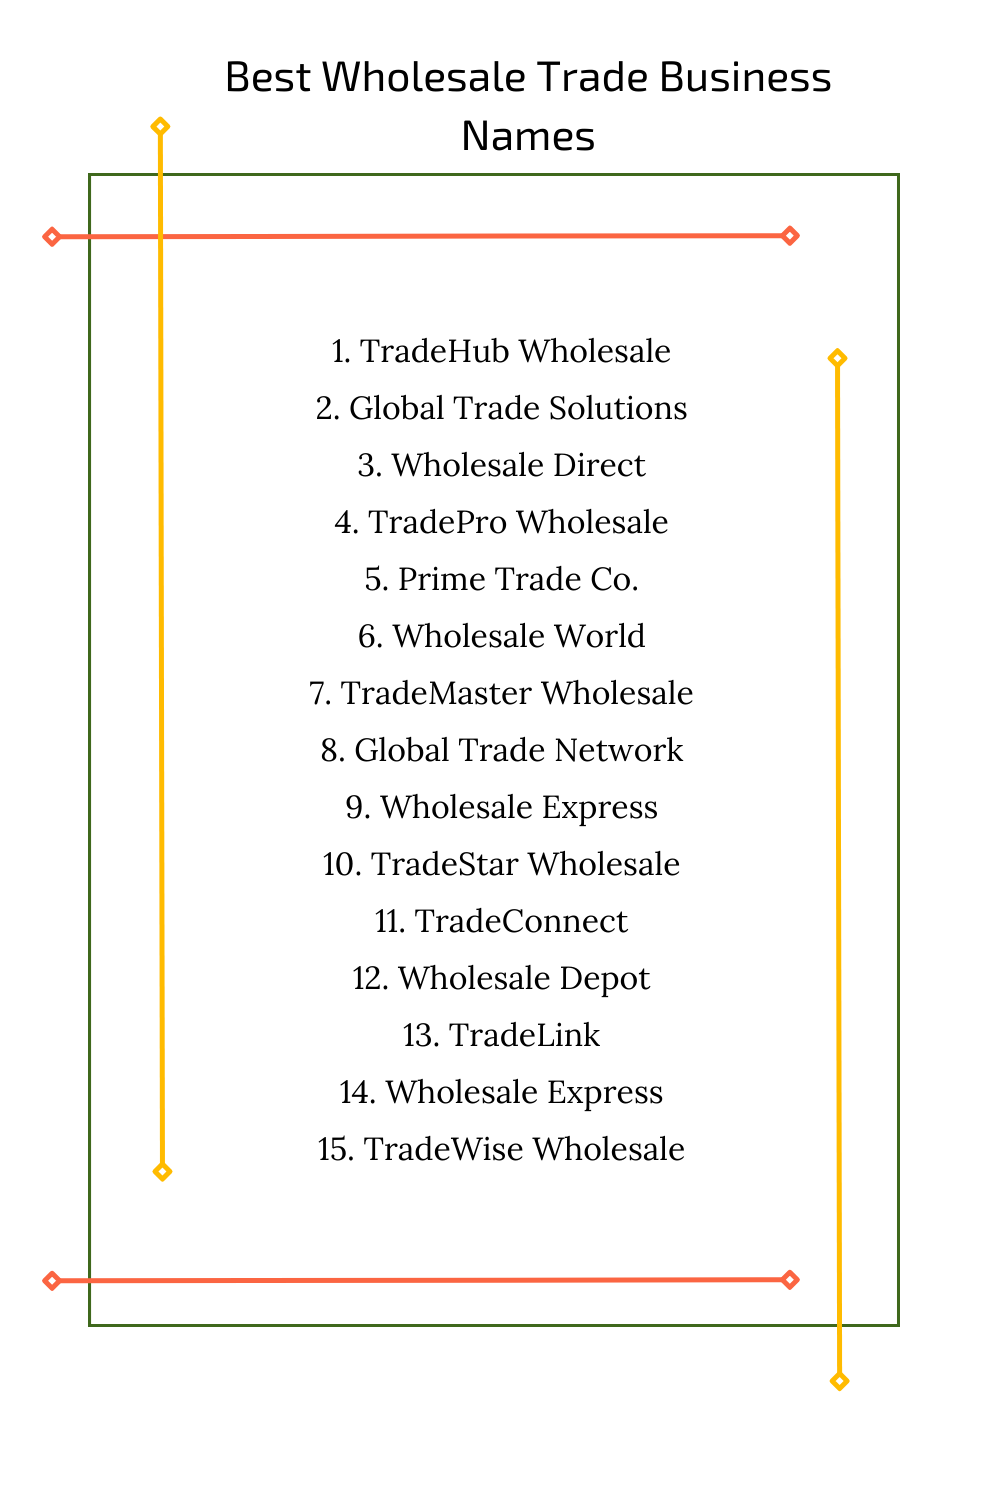 Best Wholesale Trade Business Names